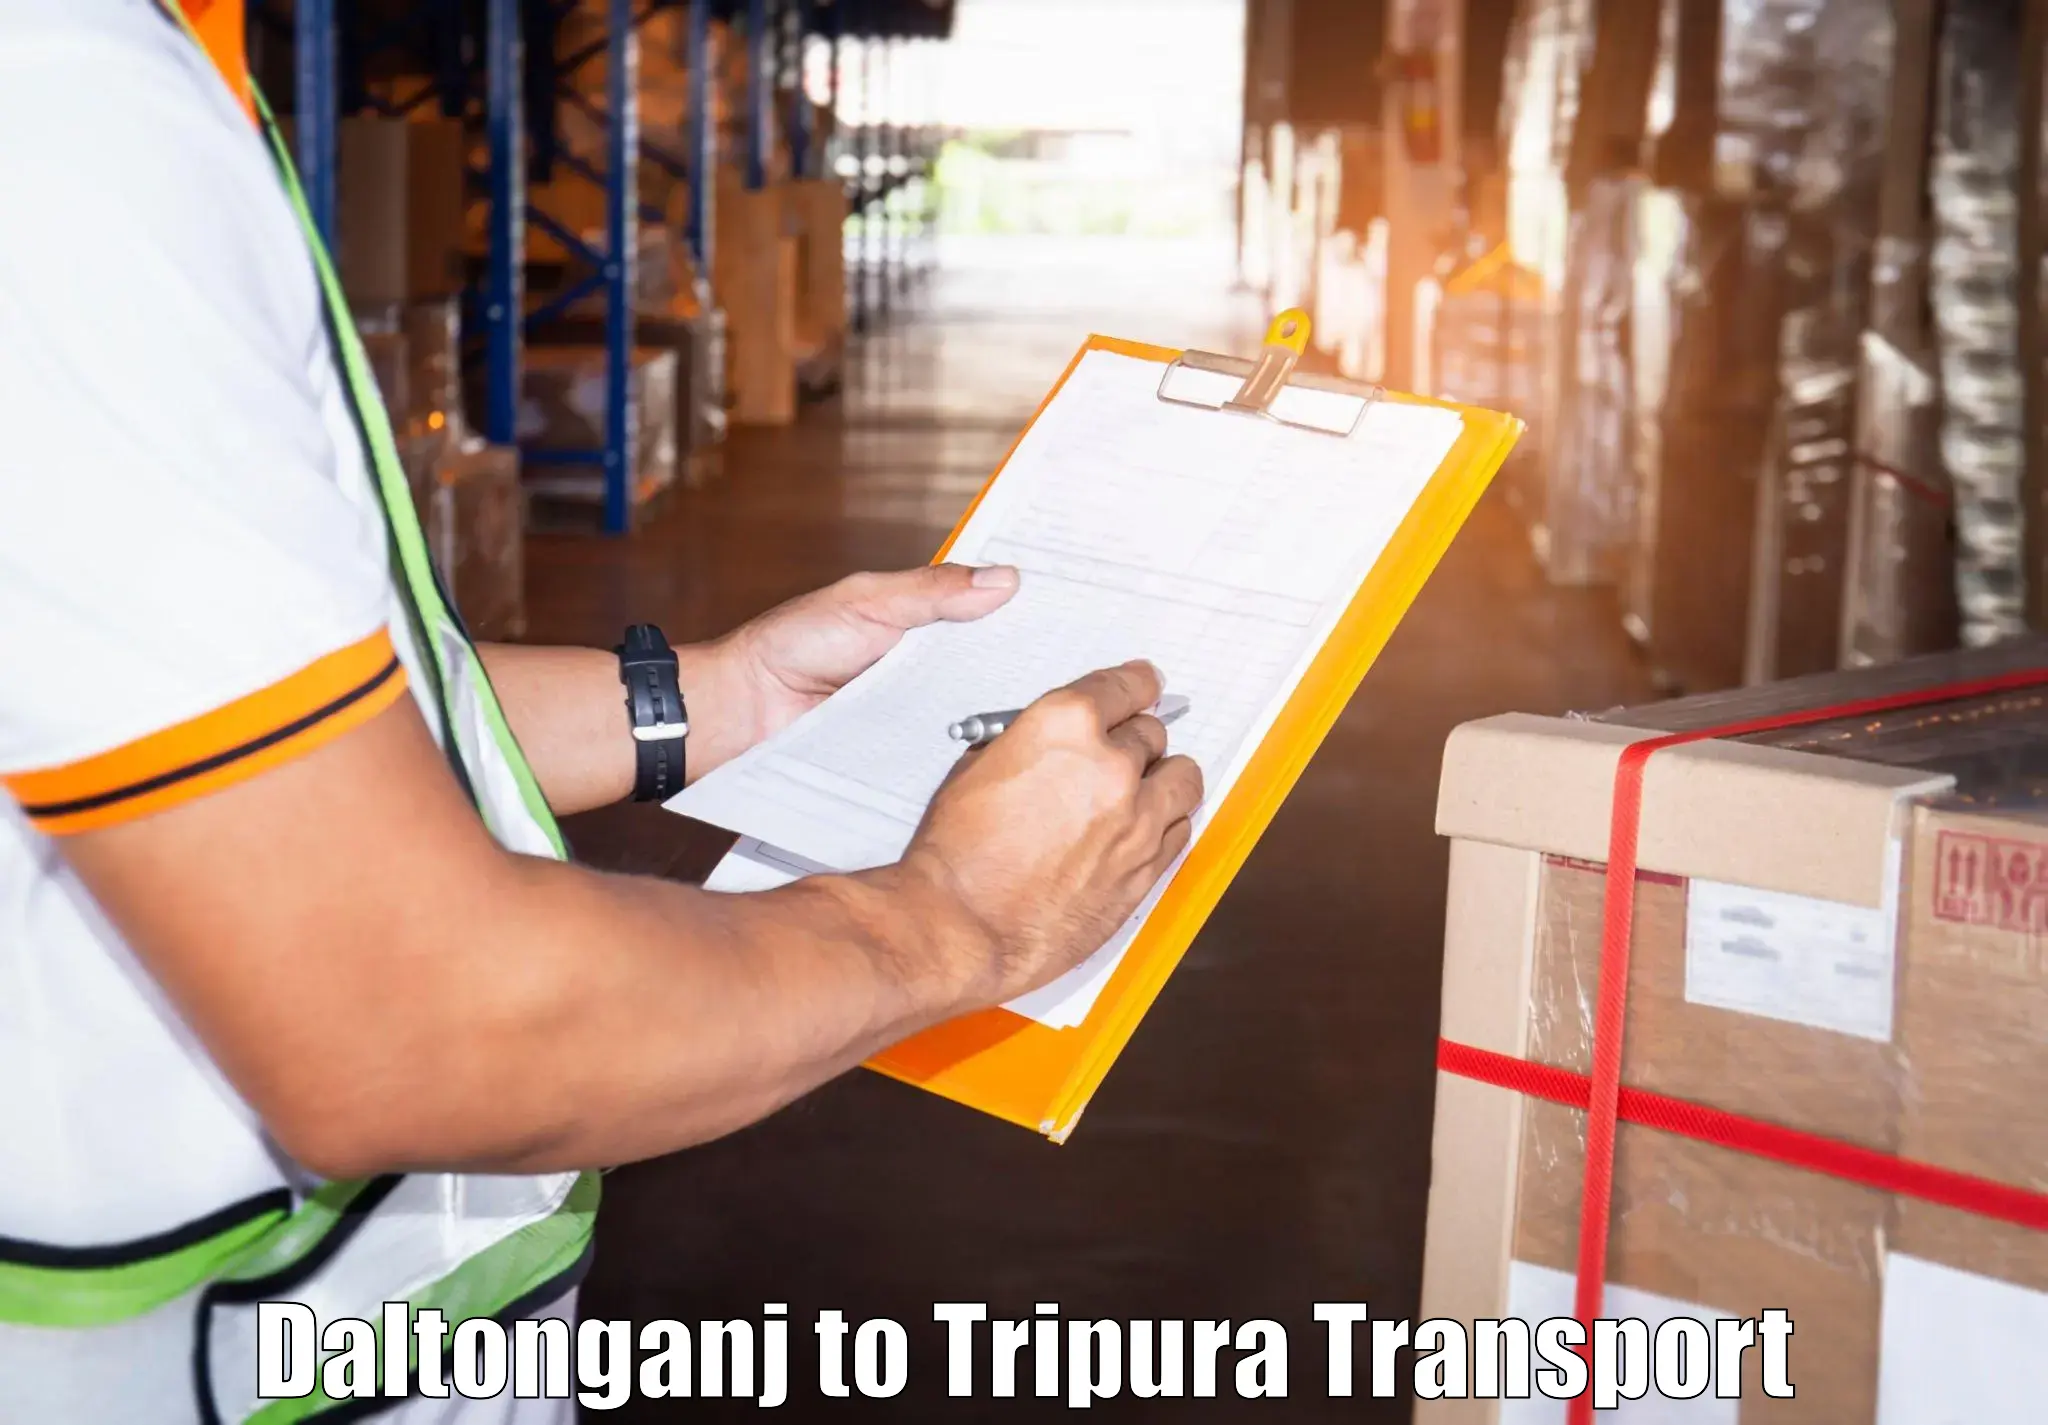 Transport bike from one state to another Daltonganj to Tripura